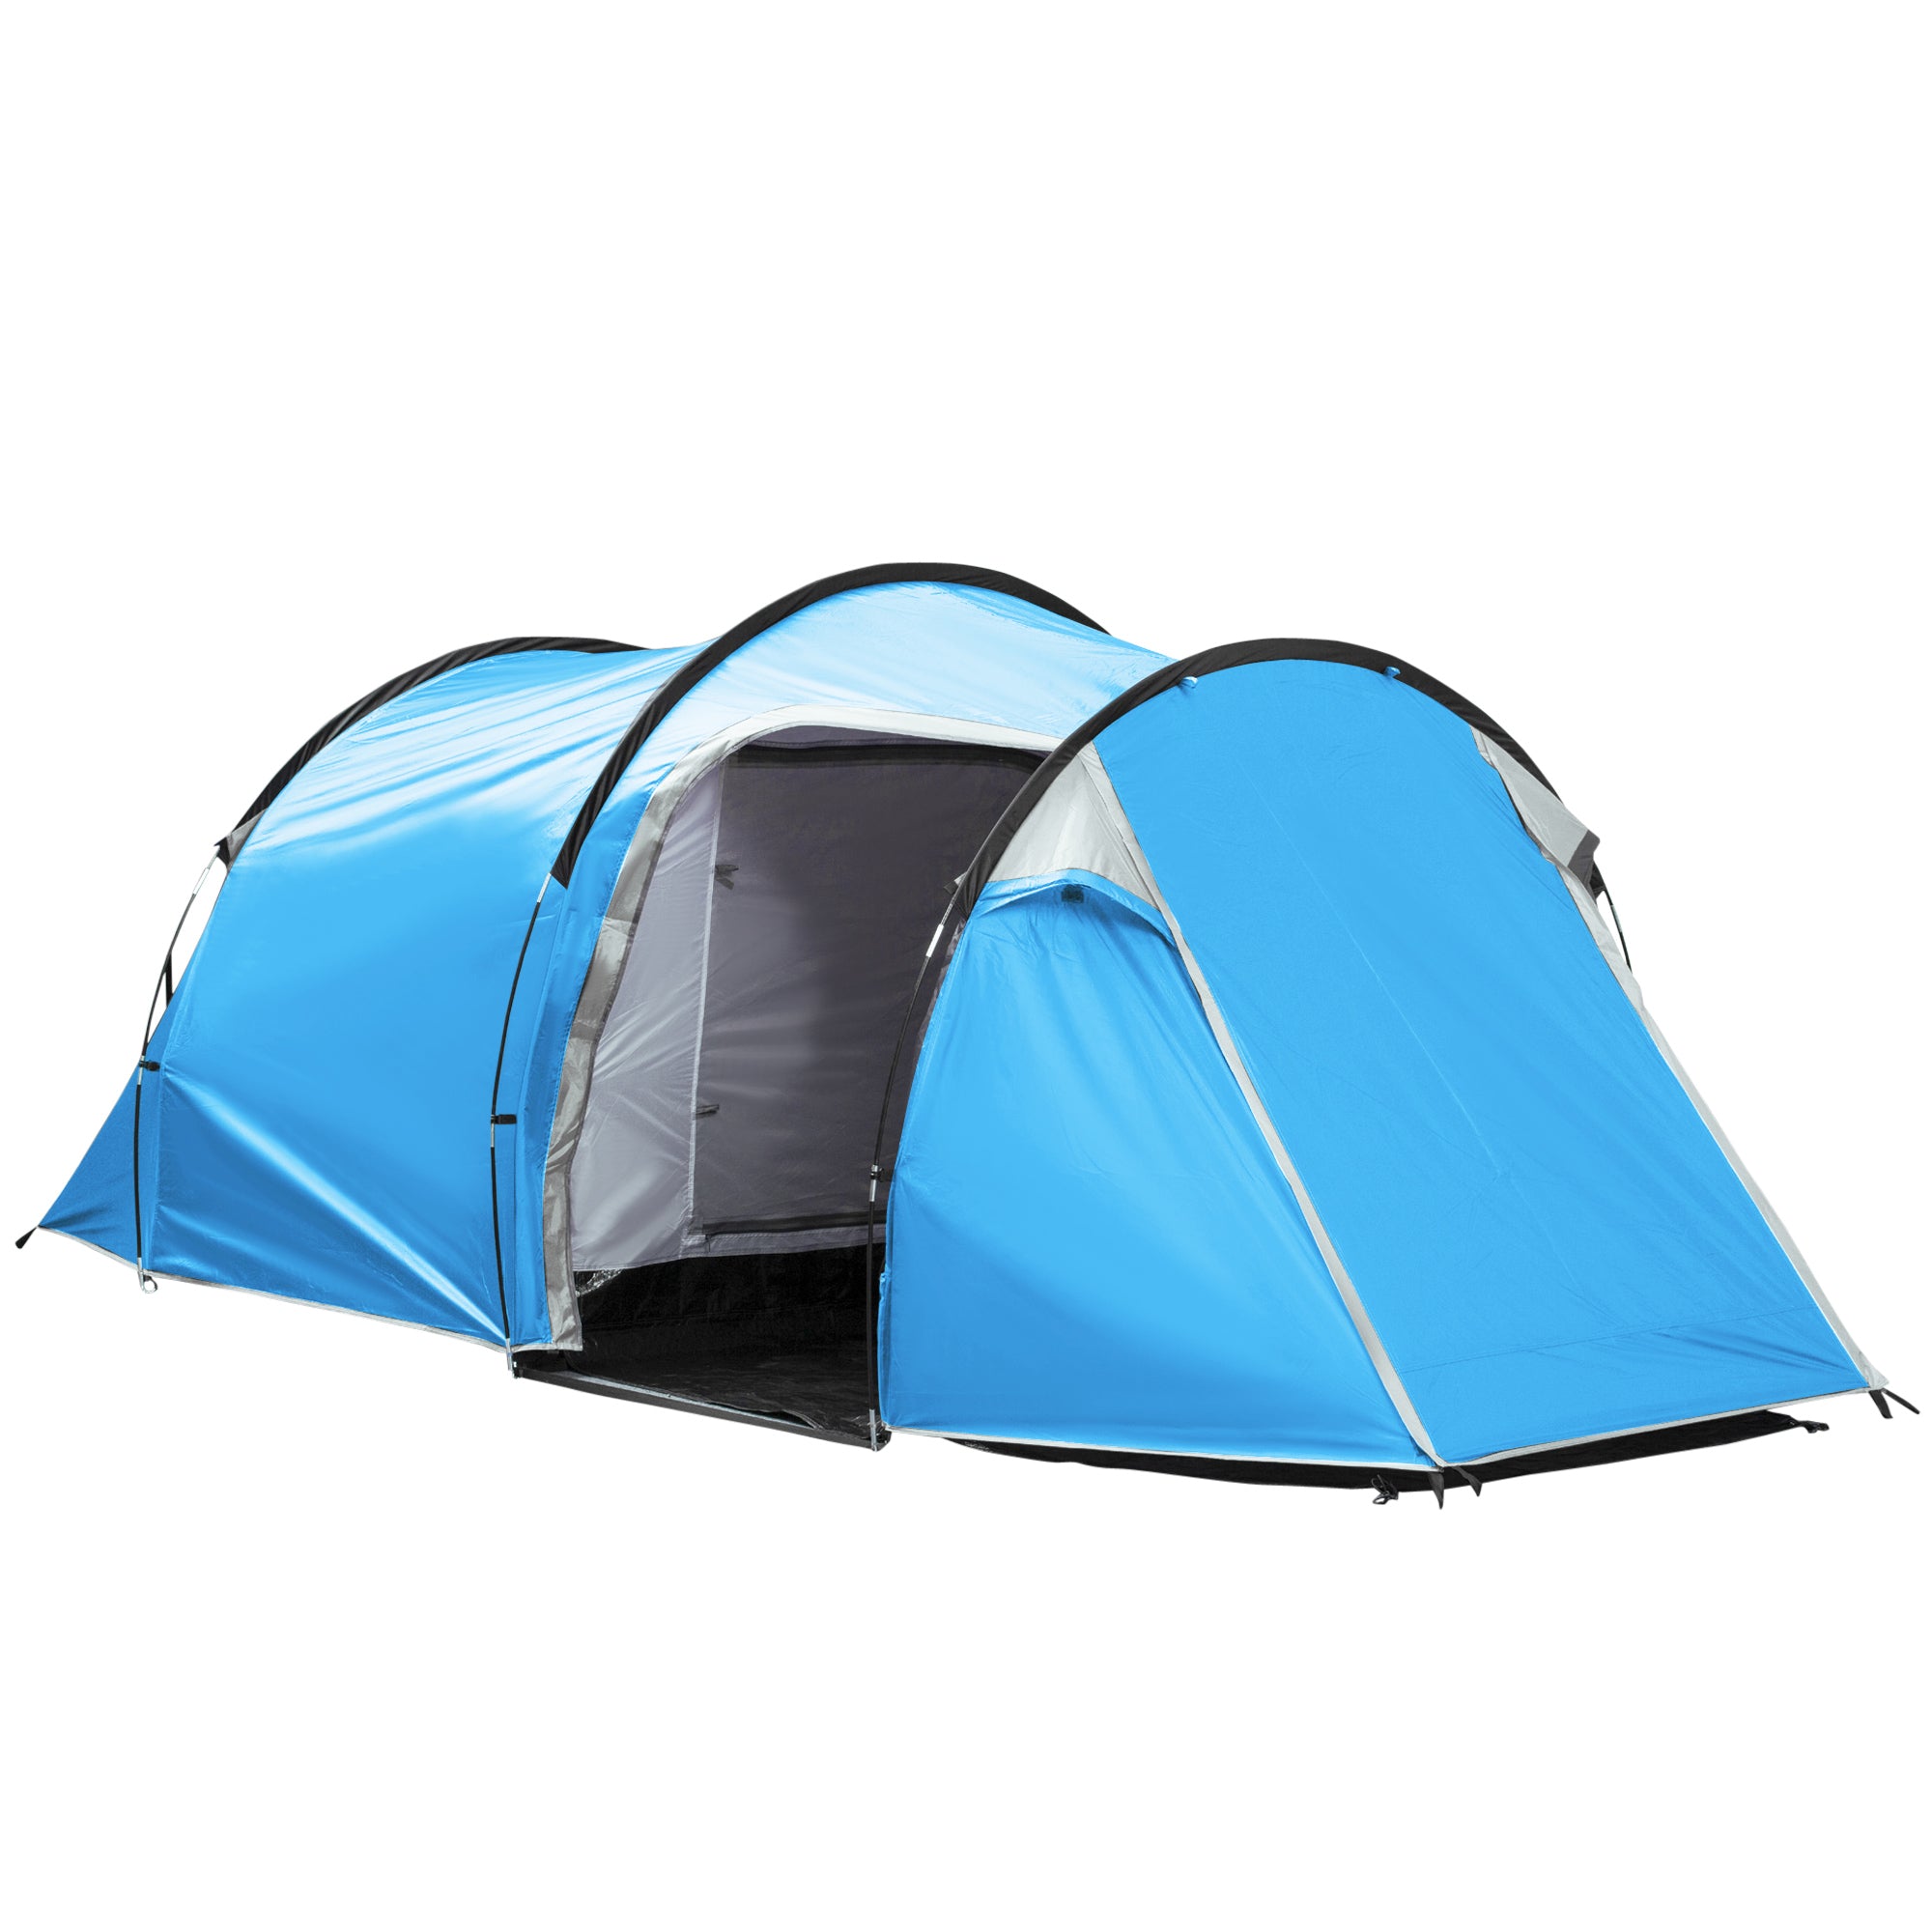 Outsunny 2-3 Man Tunnel Tents w/ Vestibule Camping Tent Porch Air Vents Rainfly Weather-Resistant Shelter Fishing Hiking Festival Shelter Blue  | TJ H